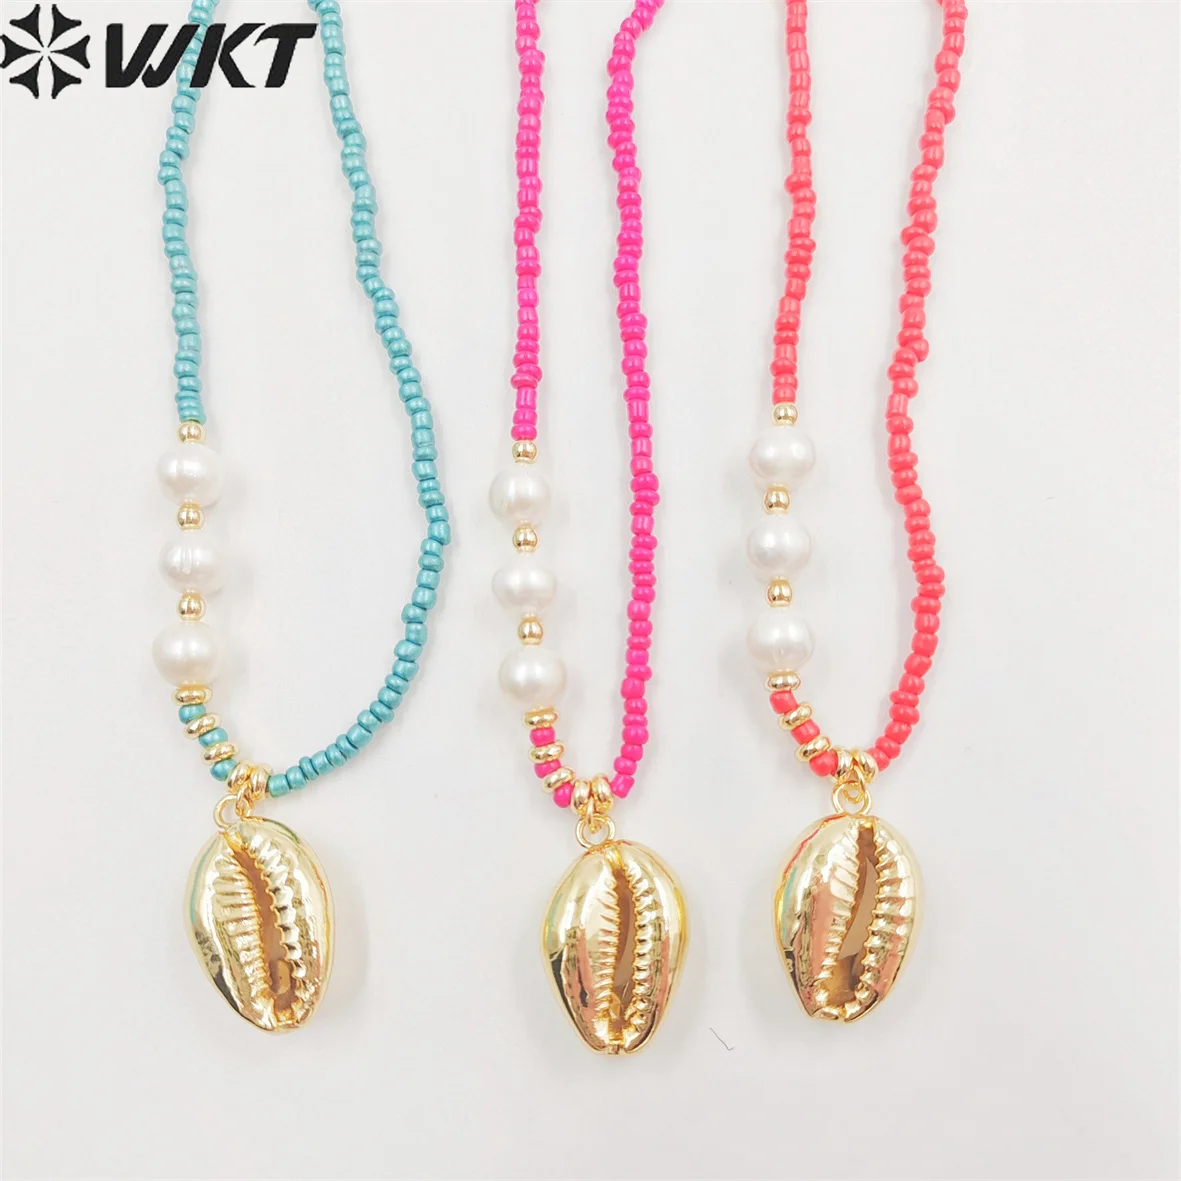 

WT-JN211 Women Chic vintage summer natural sea cowrie necklace 2mm tiny ceramic beads 16 inch long conch shell charm neckalce